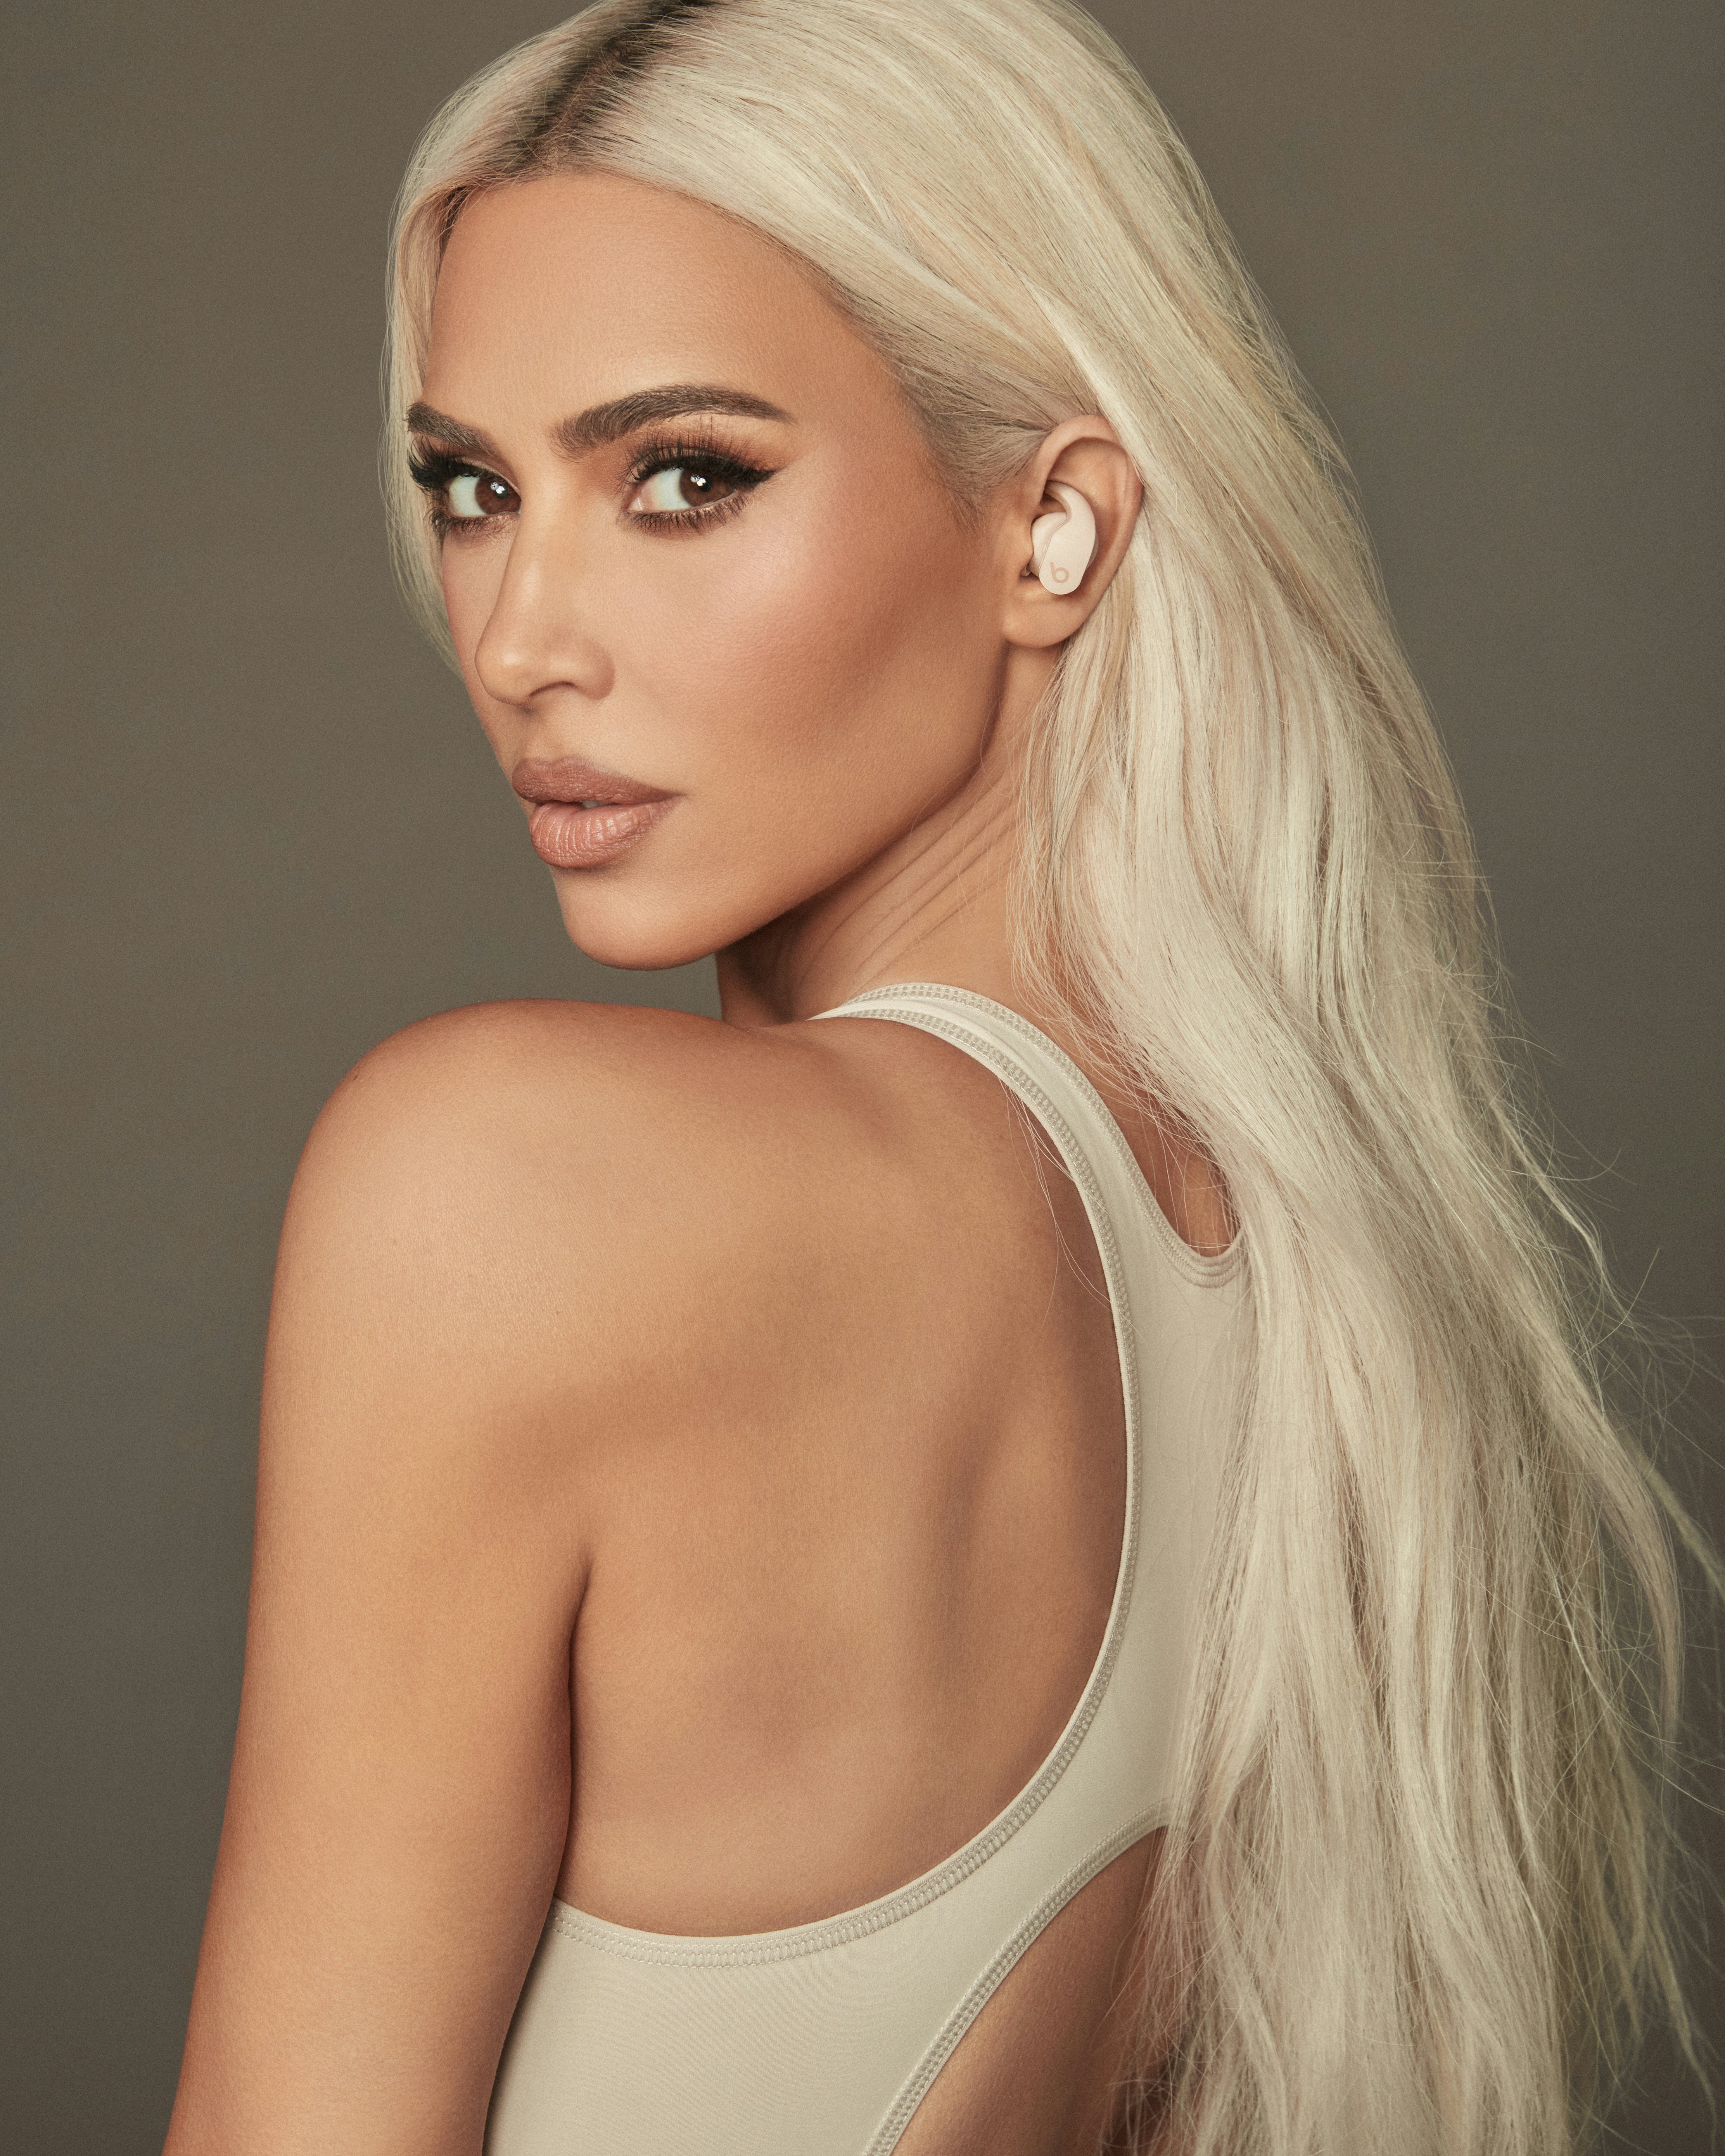 The Beats x Kim Kardashian Earbuds To Buy, Based On Your Style